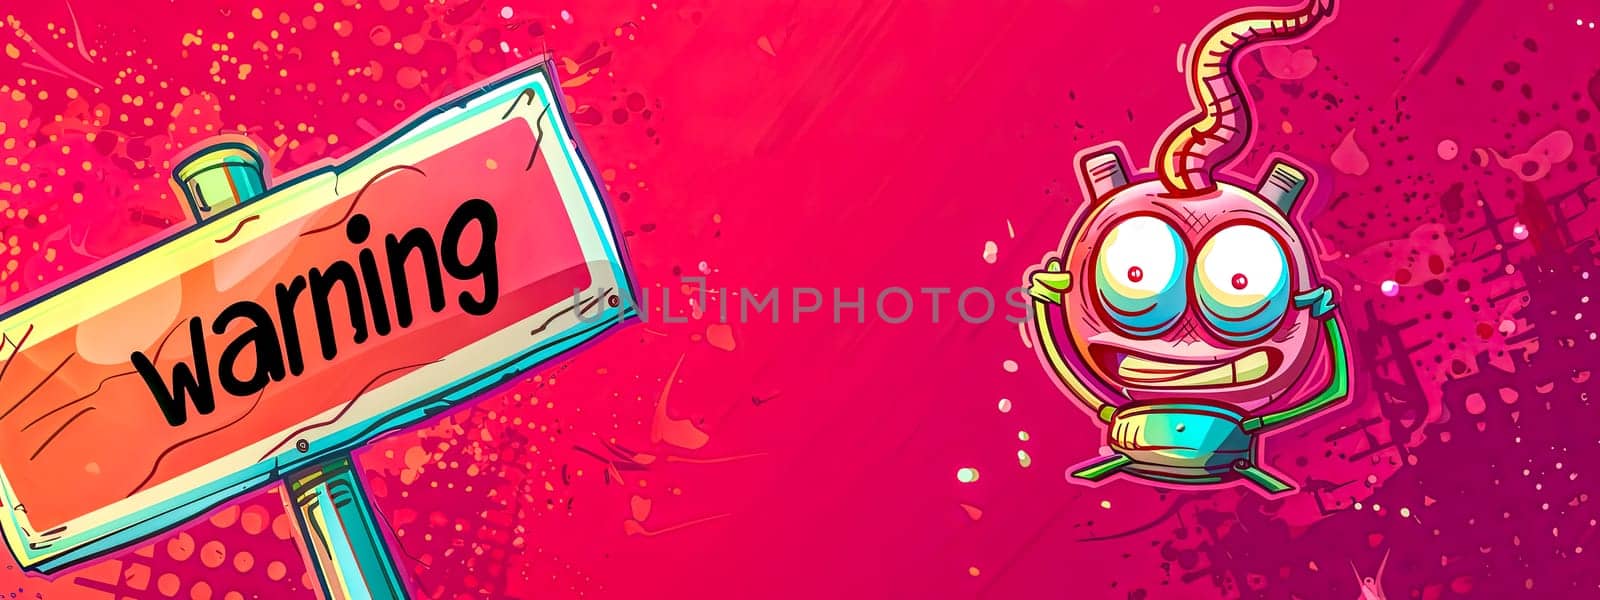 Vibrant illustration with a robot and warning sign on a dynamic pink background